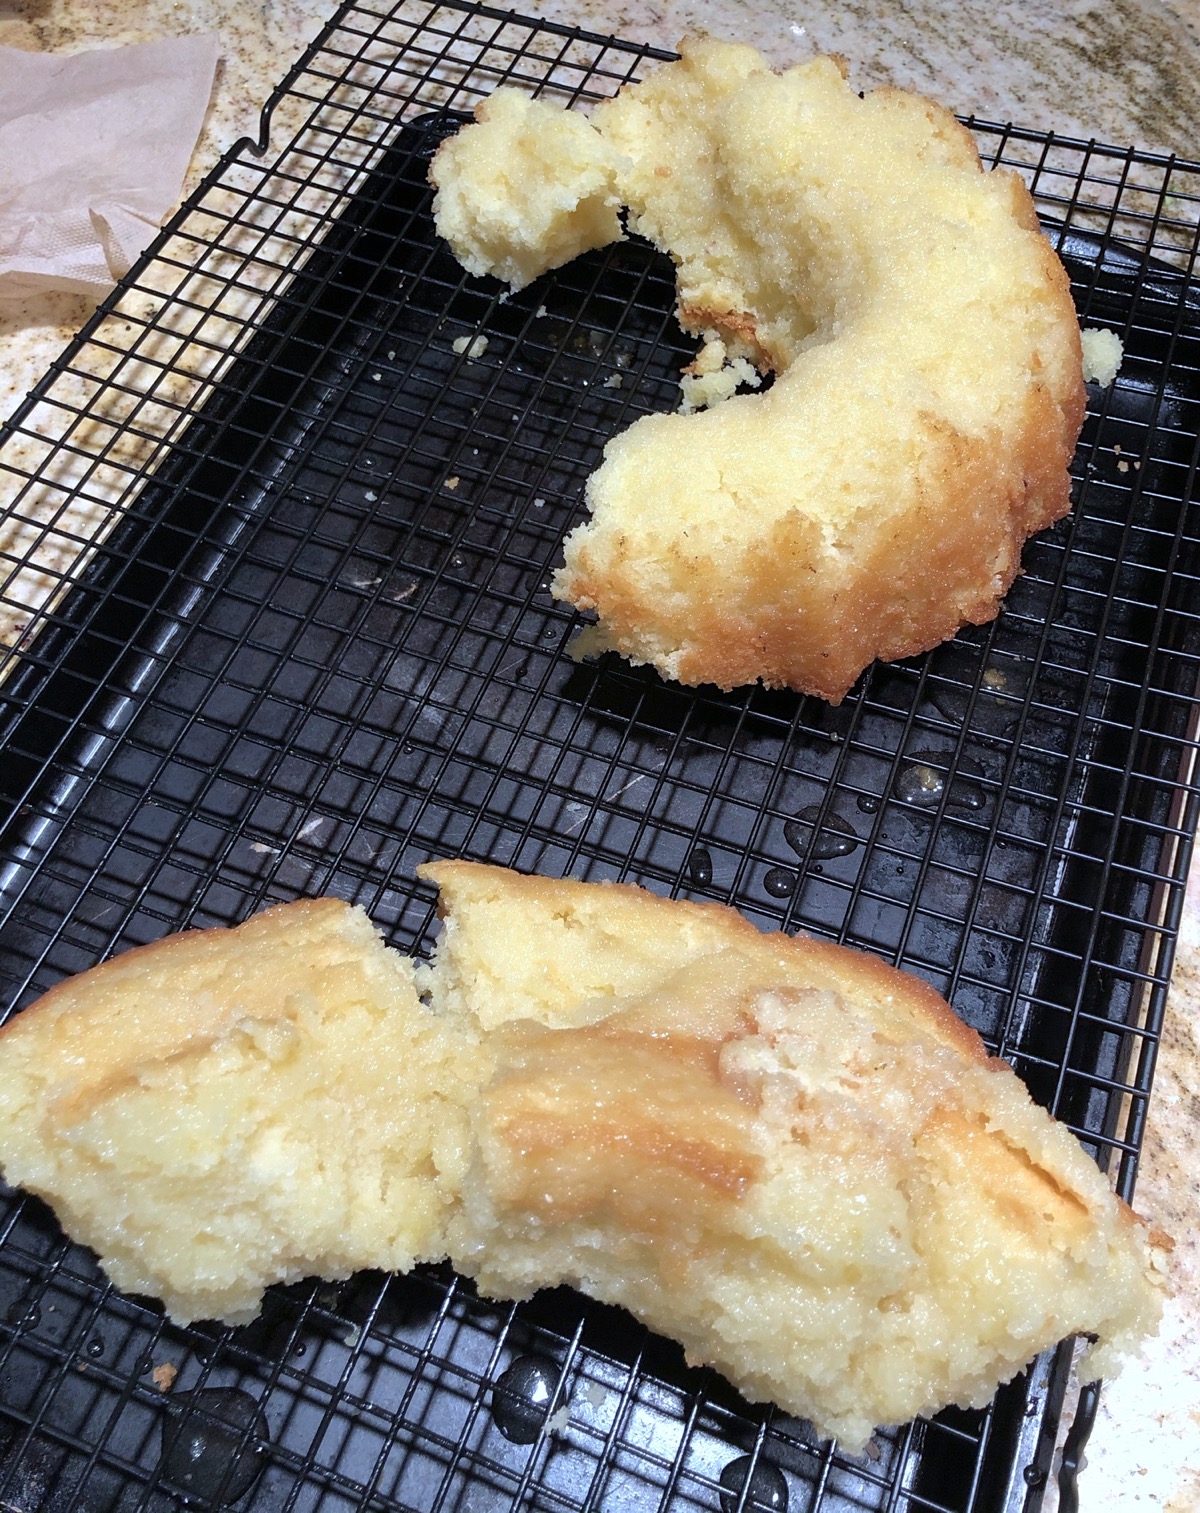 Vanilla Bundt cake in two ragged halves on a cooling rack.